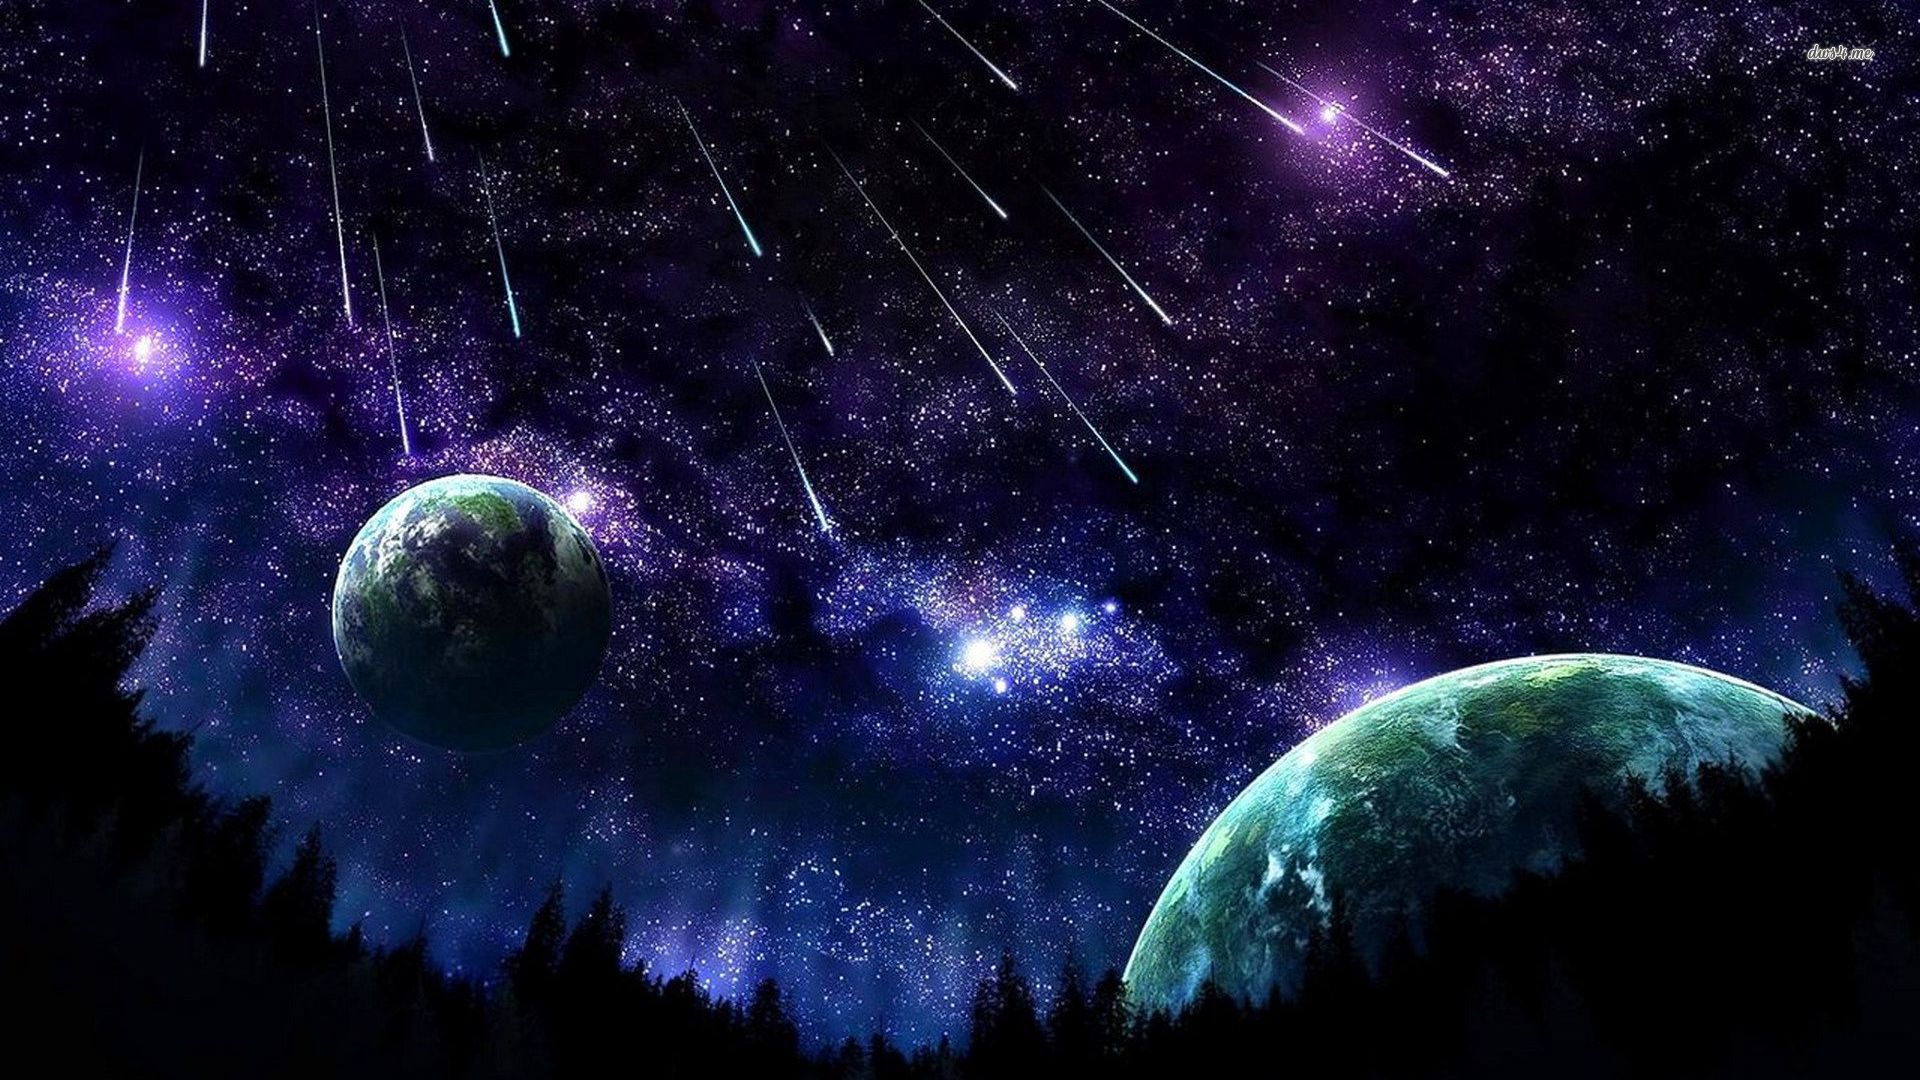 Gallery Beautiful Night Sky Wallpaper Collections